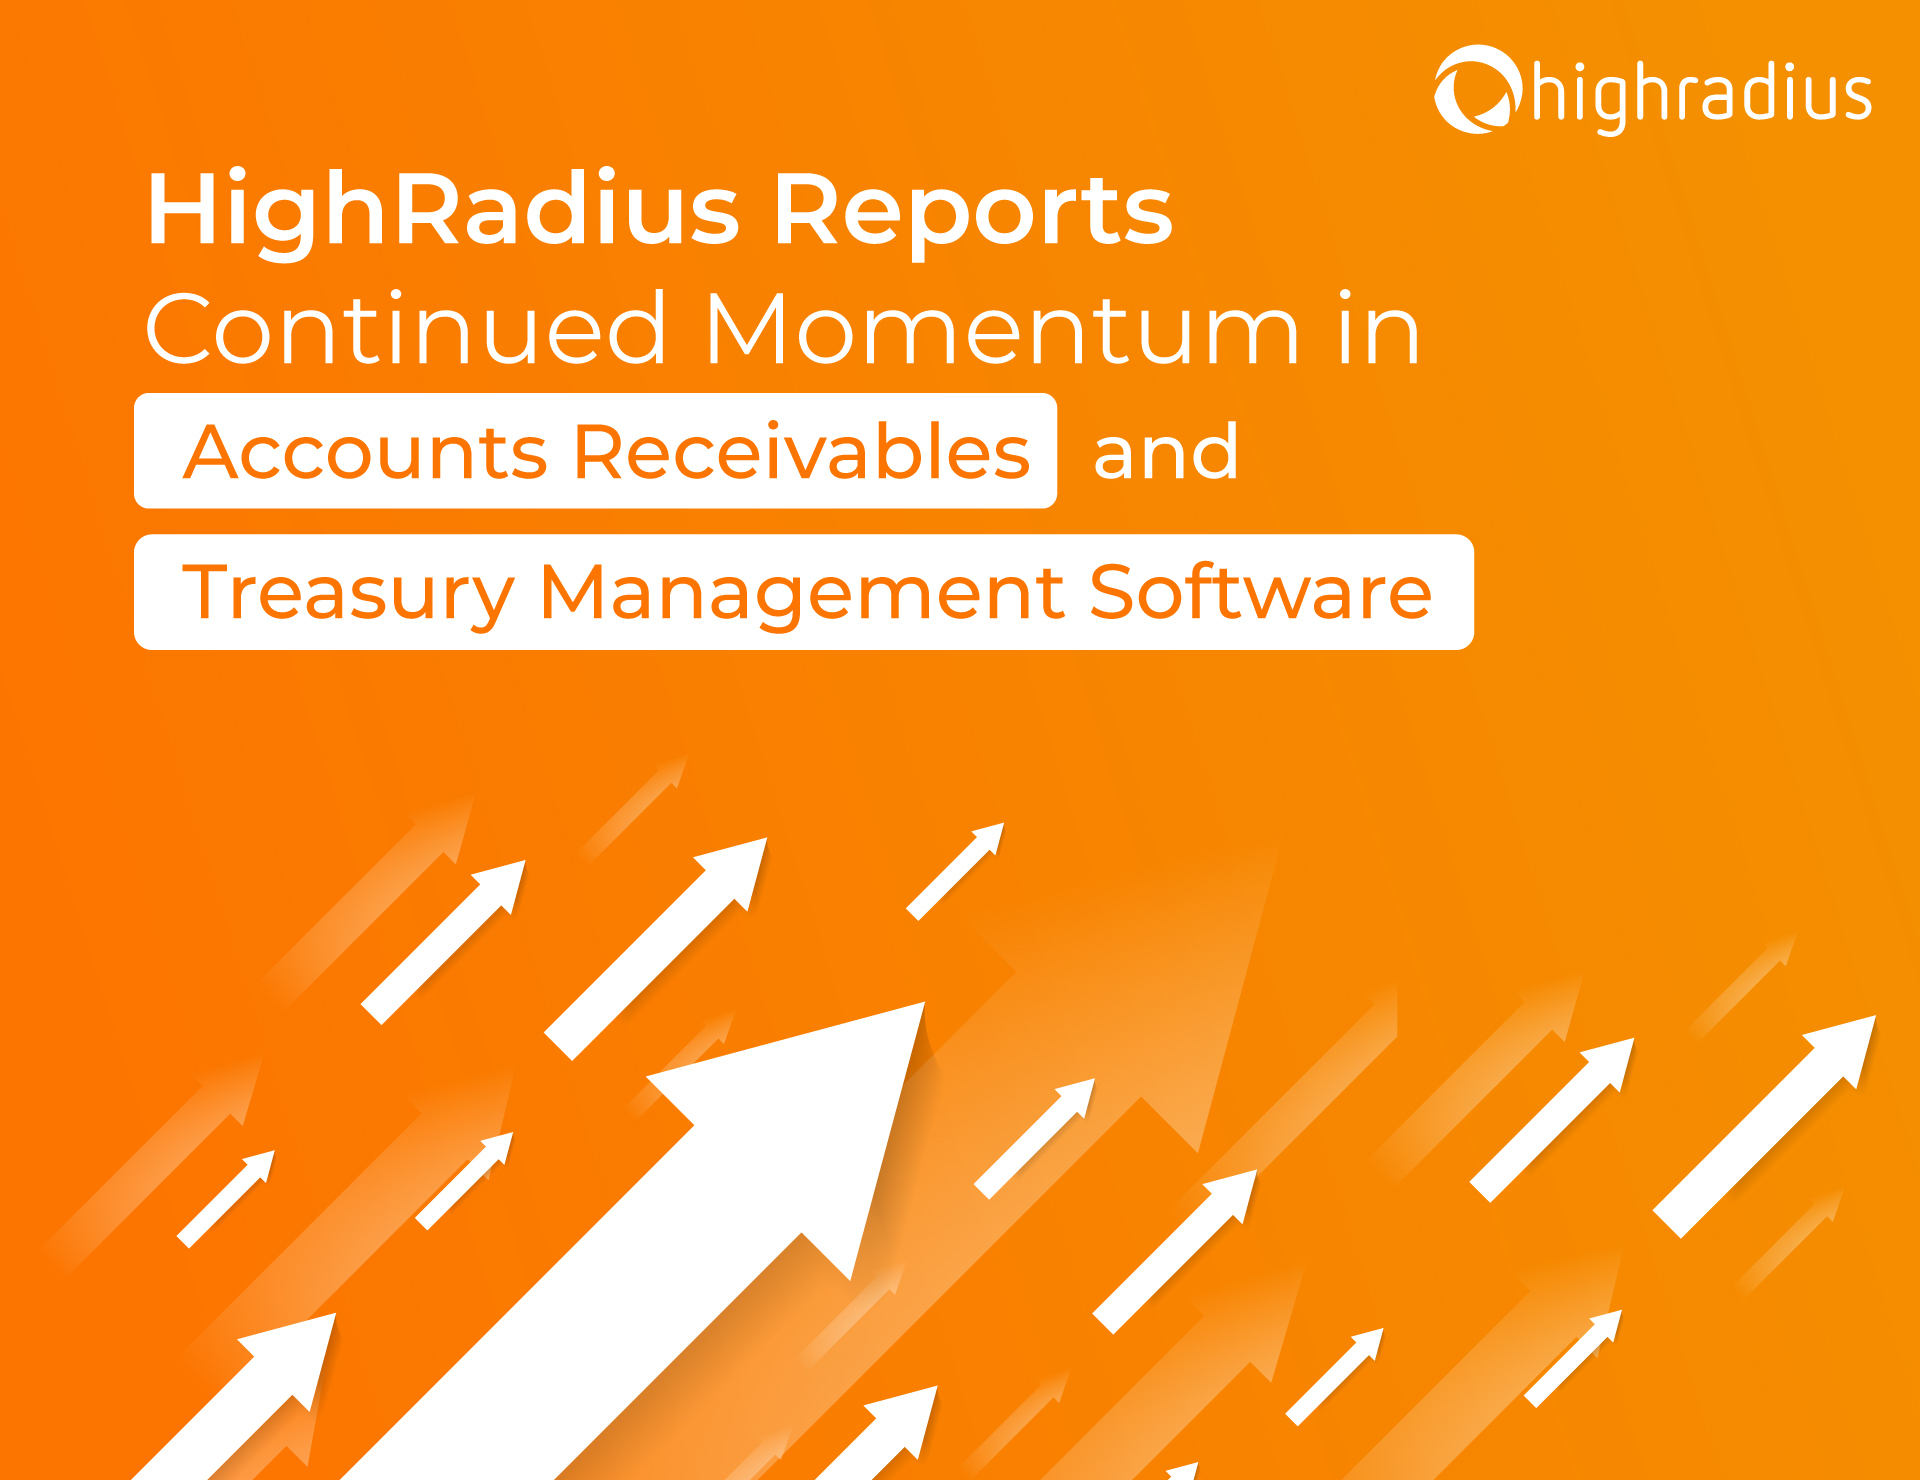 HighRadius Reports Continued Momentum in Accounts Receivables and